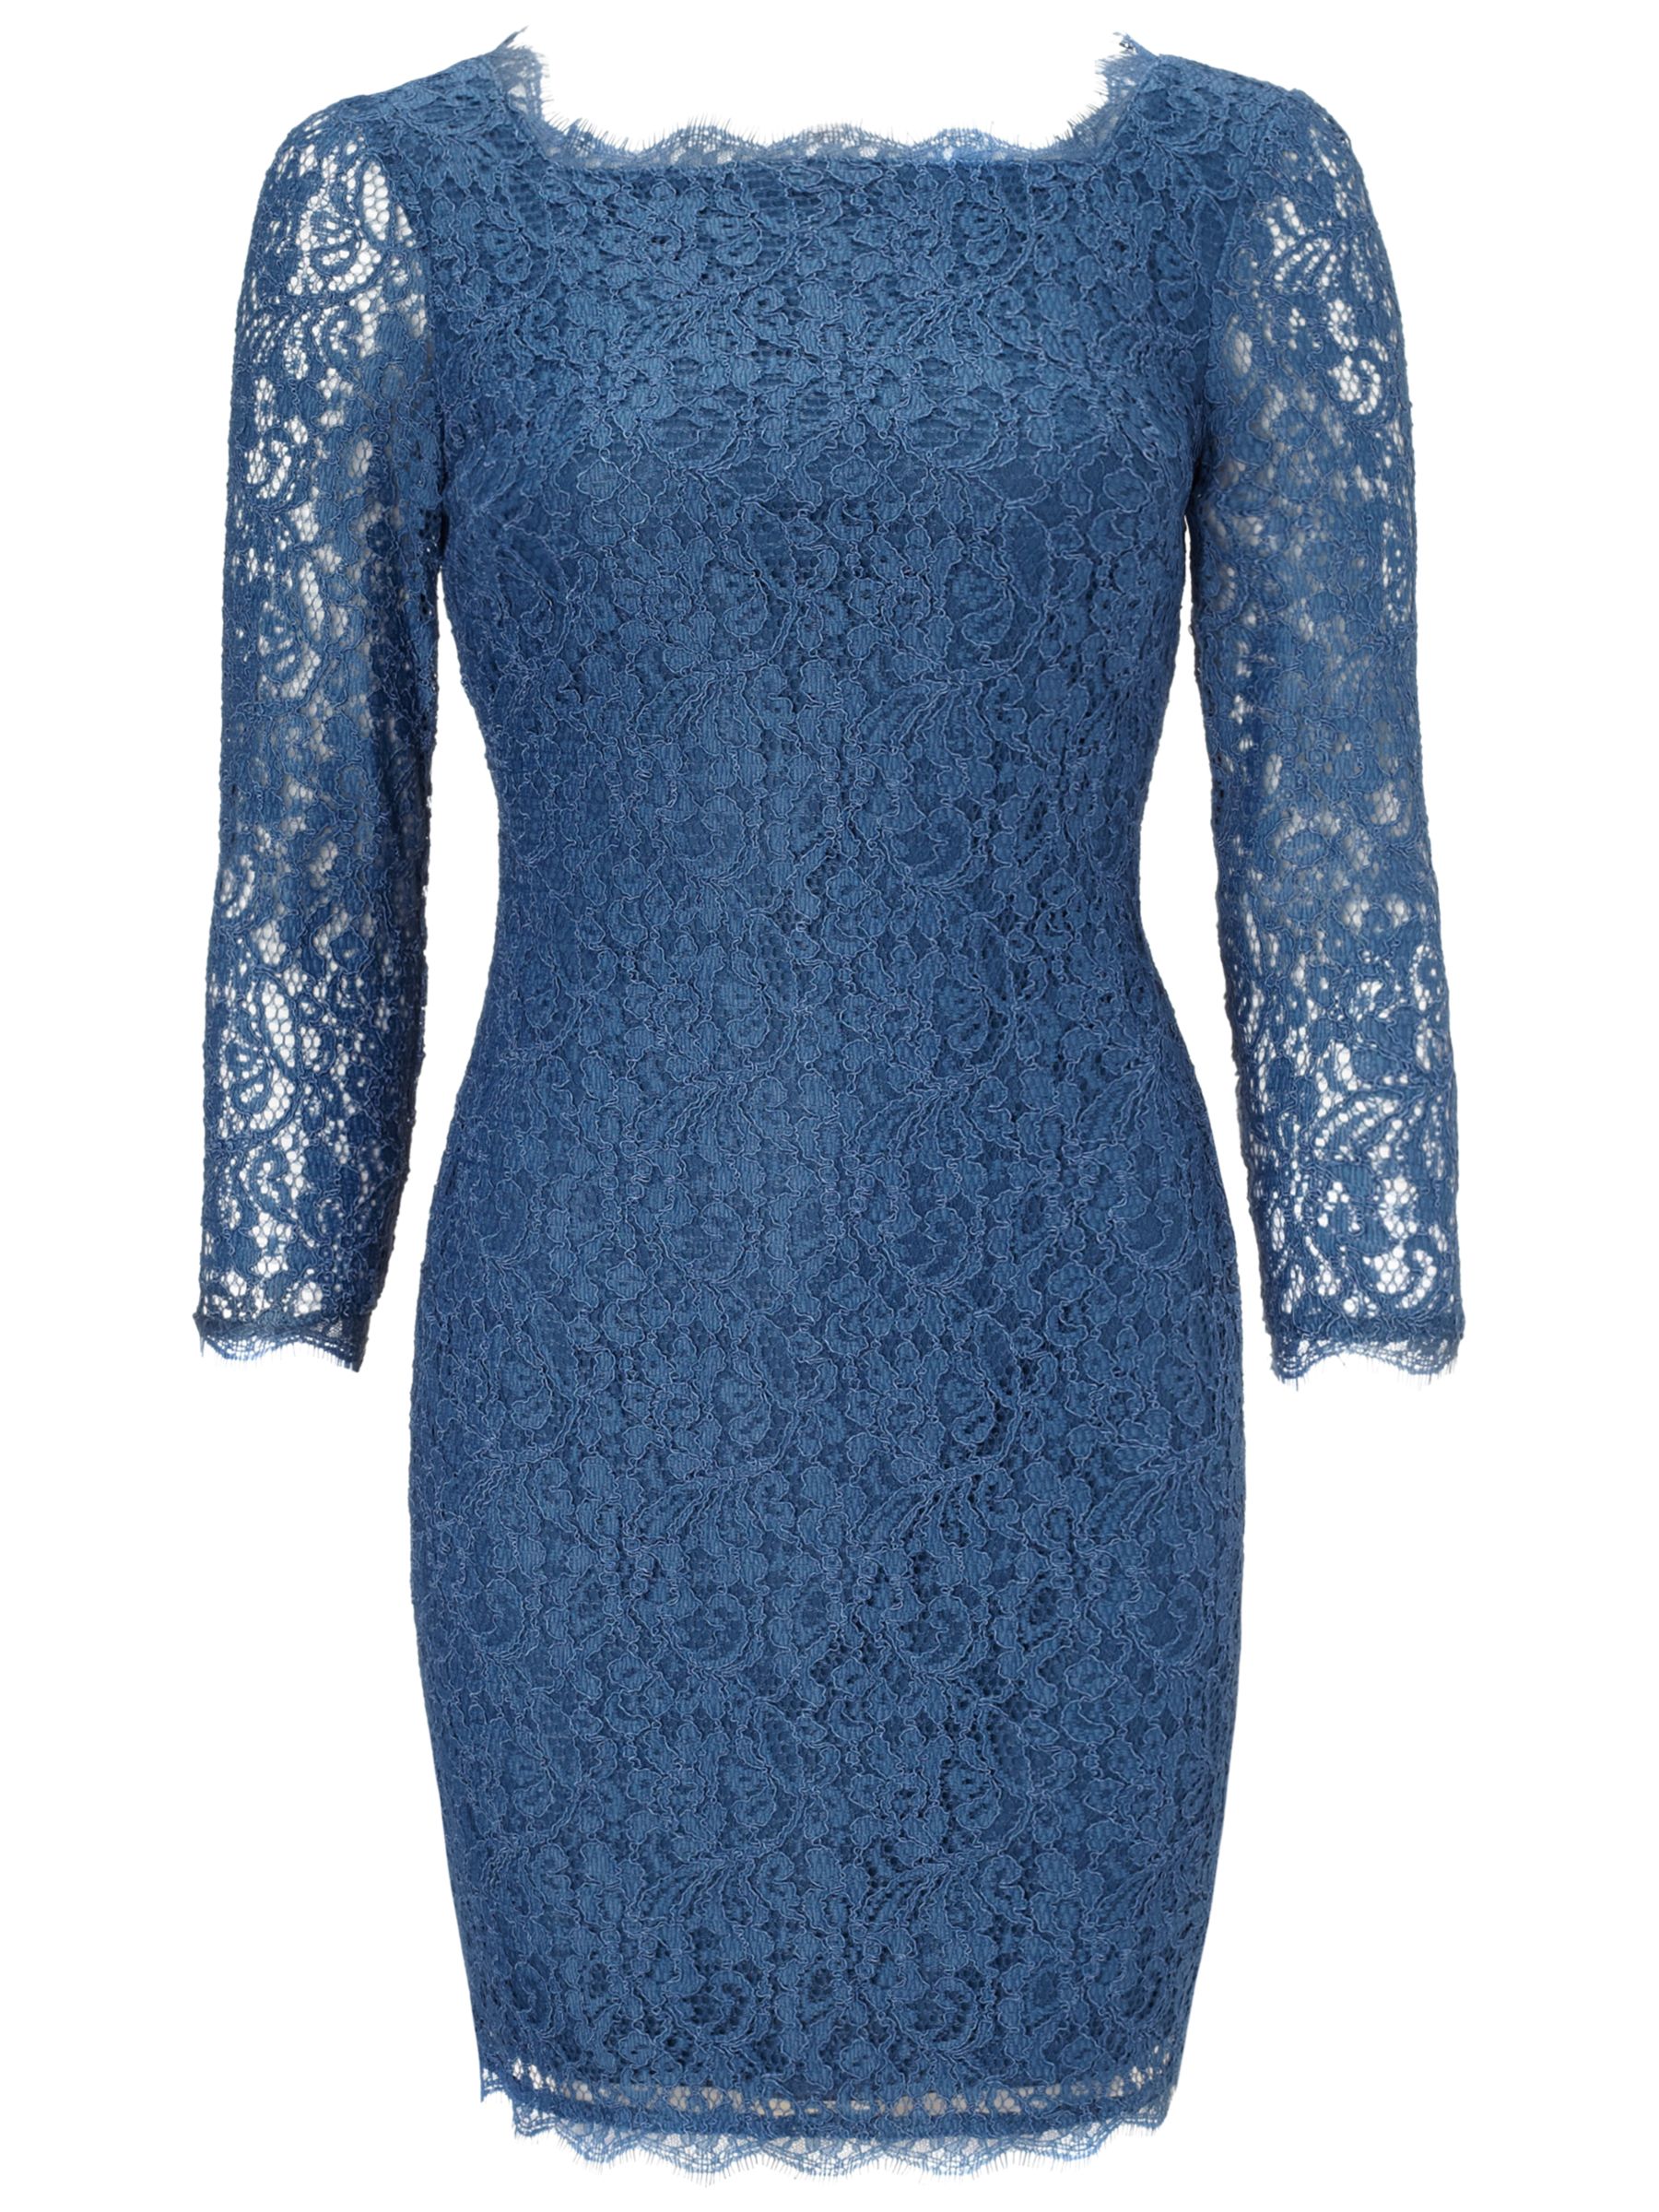 Adrianna Papell Long Sleeve Lace Dress, Night